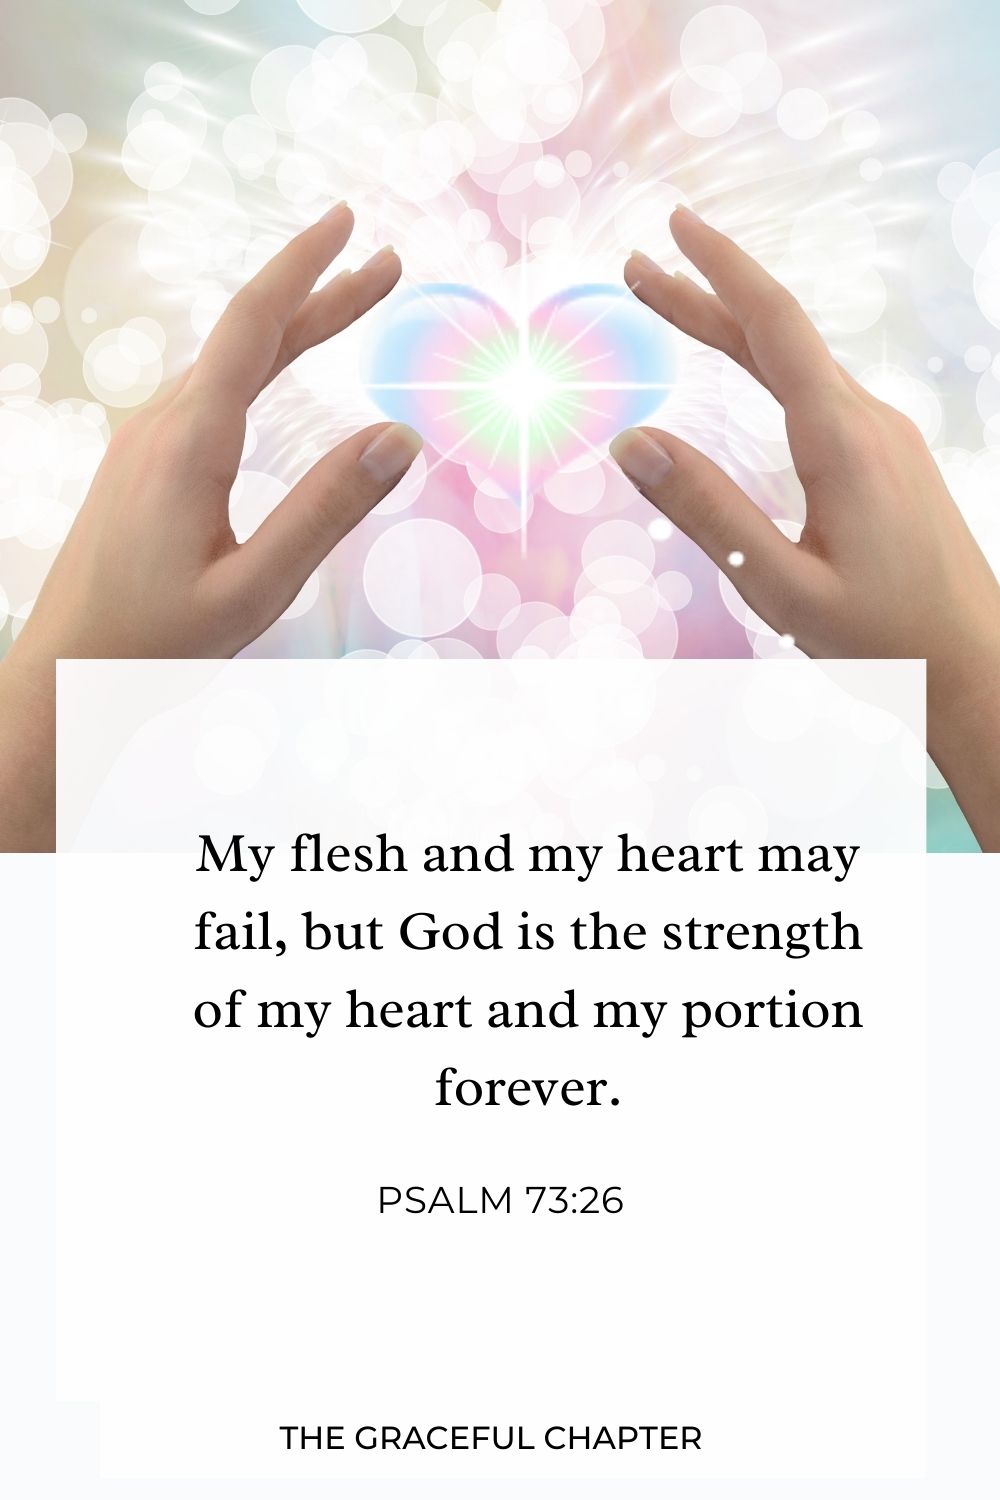 My flesh and my heart may fail, but God is the strength of my heart and my portion forever. Psalm 73:26